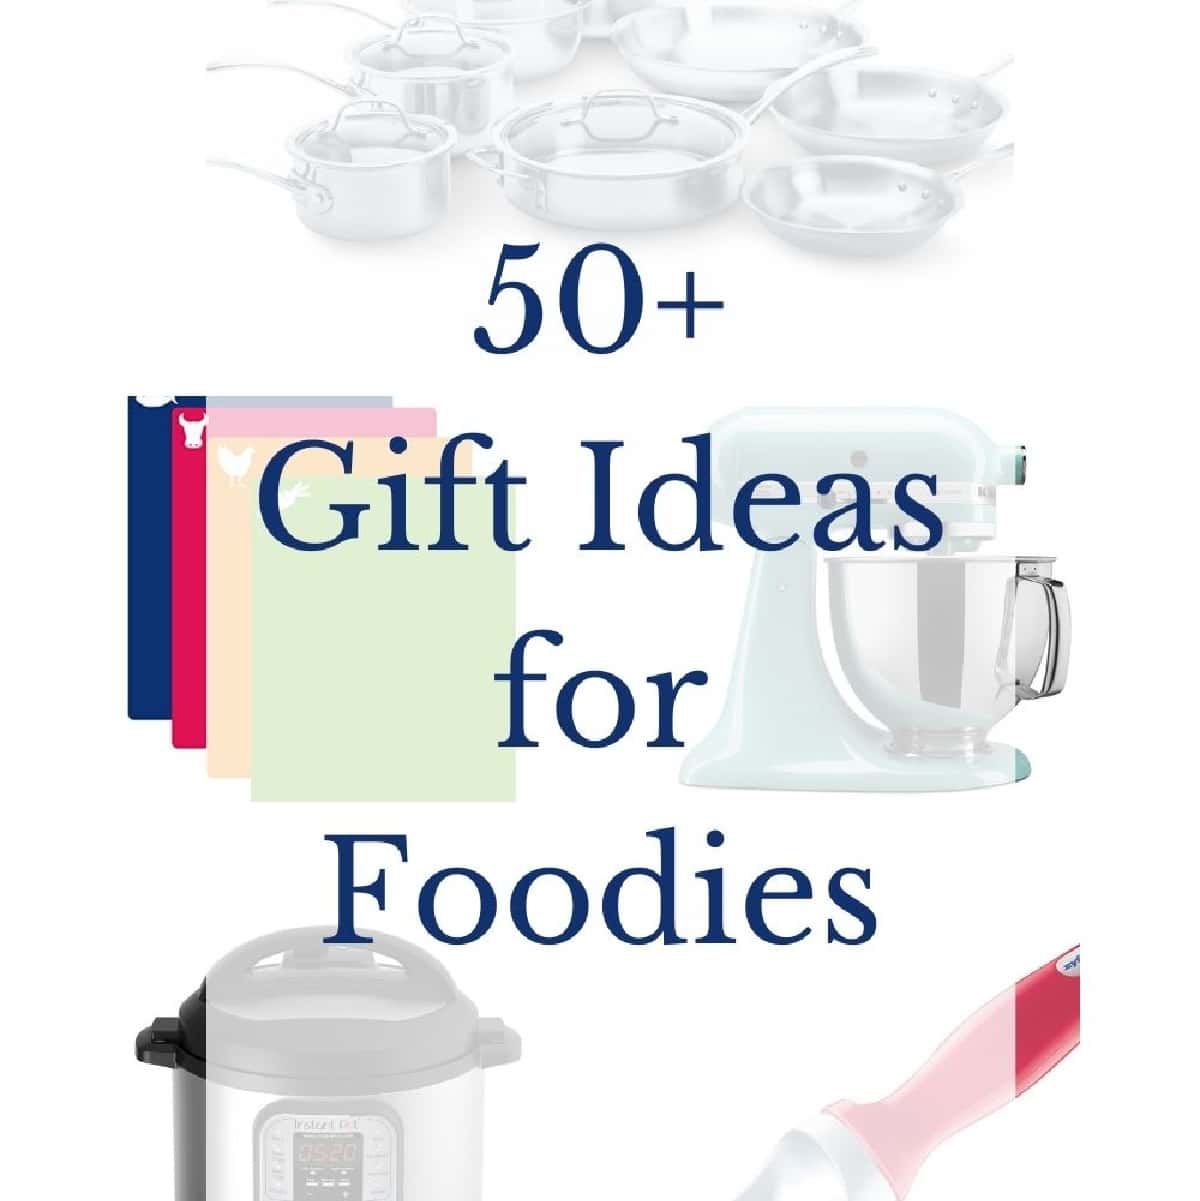 50+ Gift Ideas for Foodies